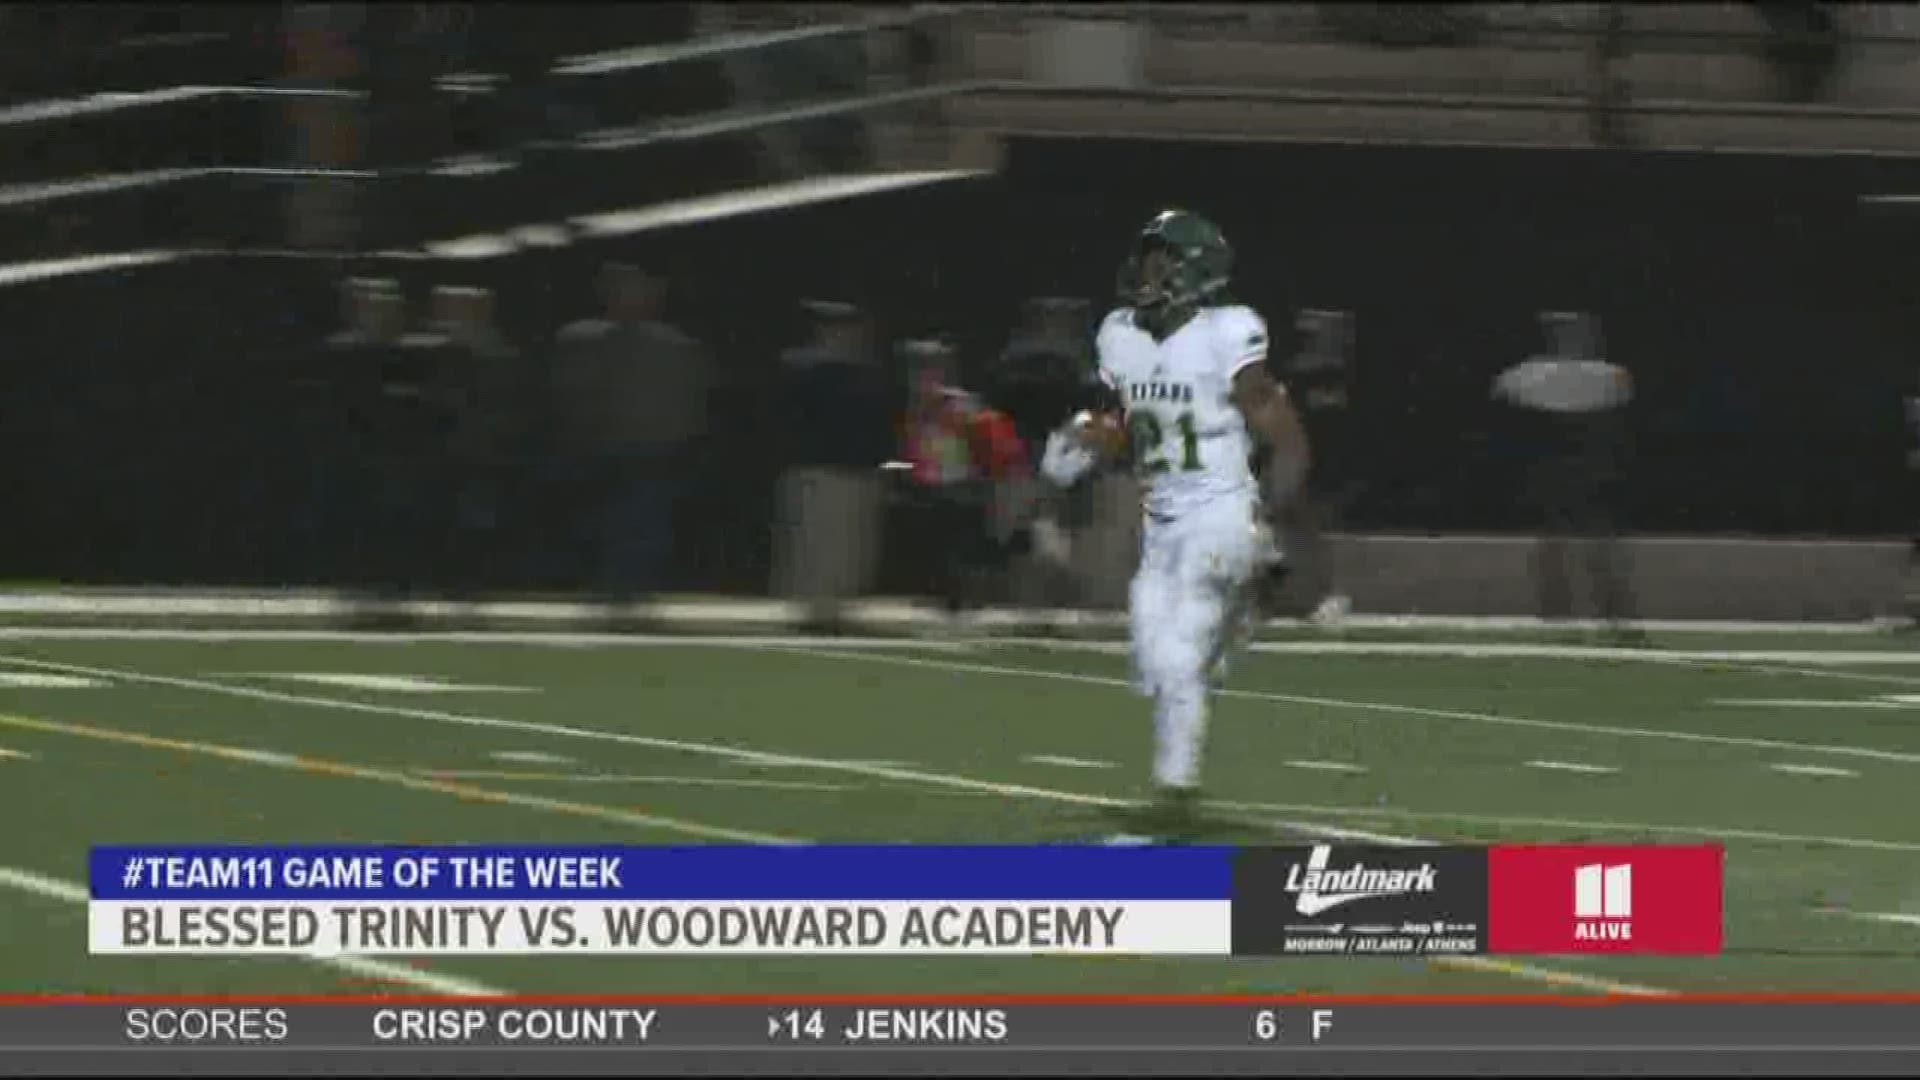 Final: Blessed Trinity 46, Woodward Academy 21